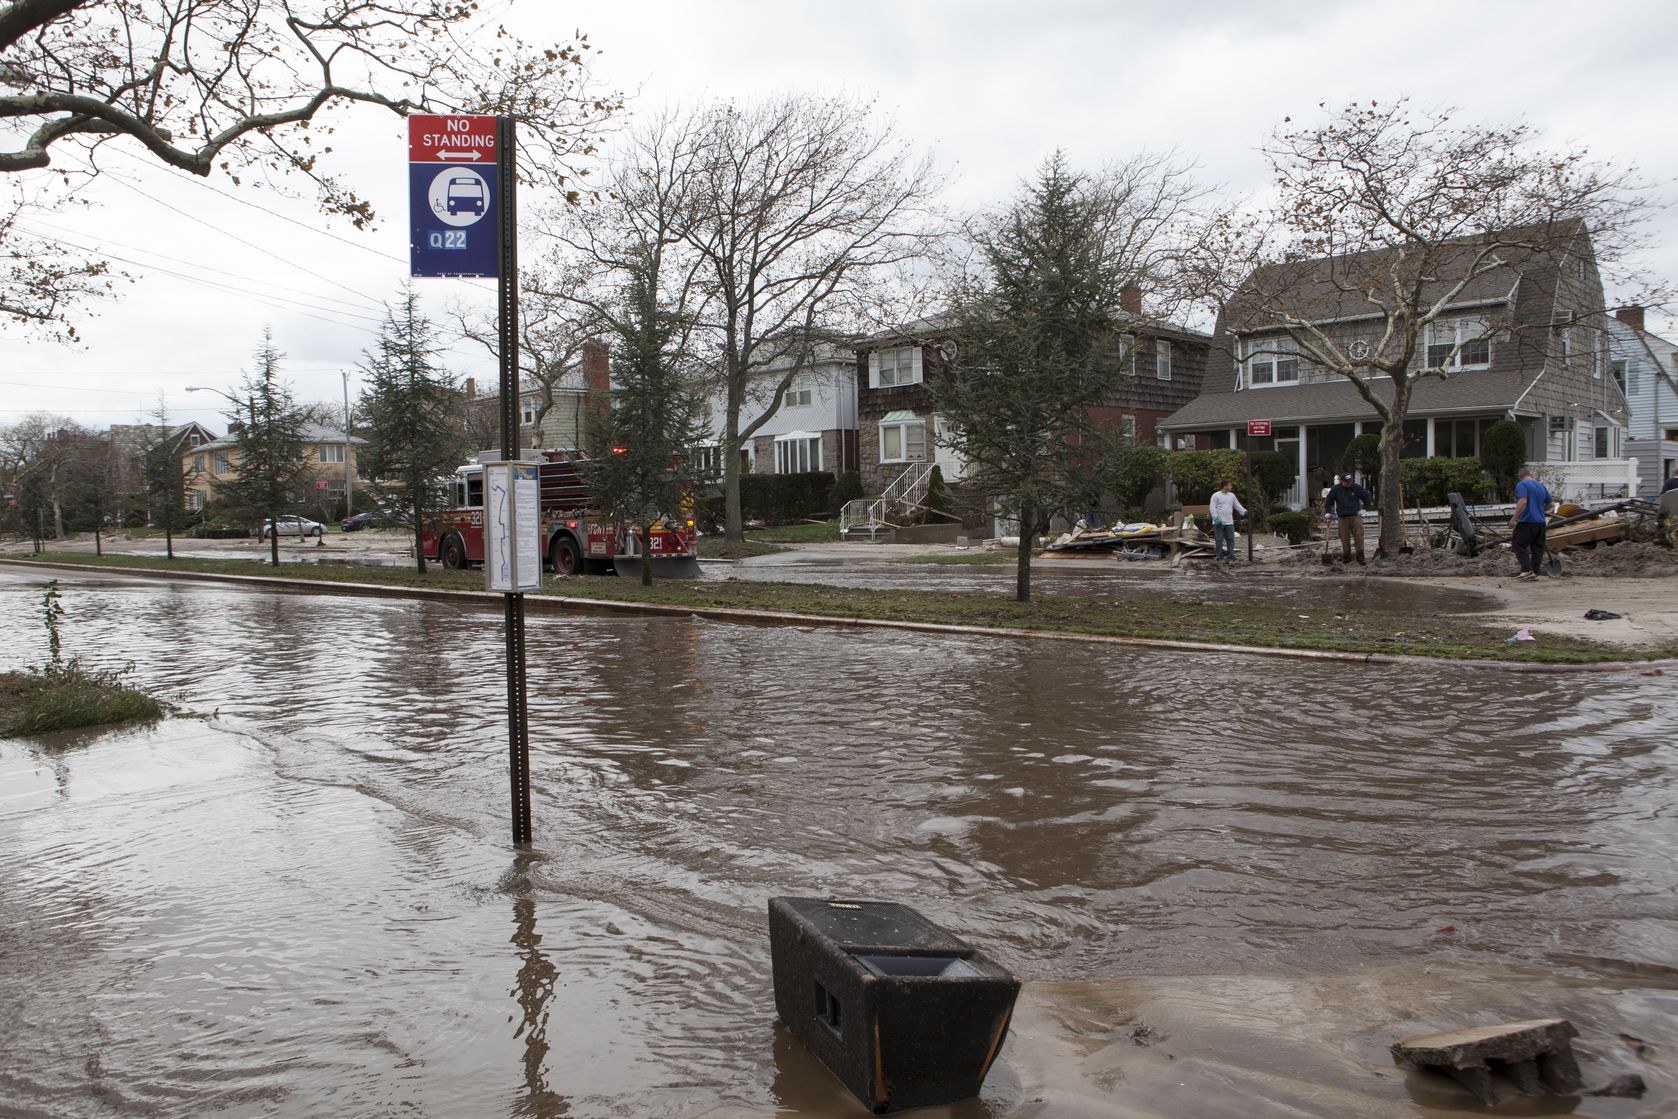 Roads were closed for two months following Sandy. When homeowners finally return